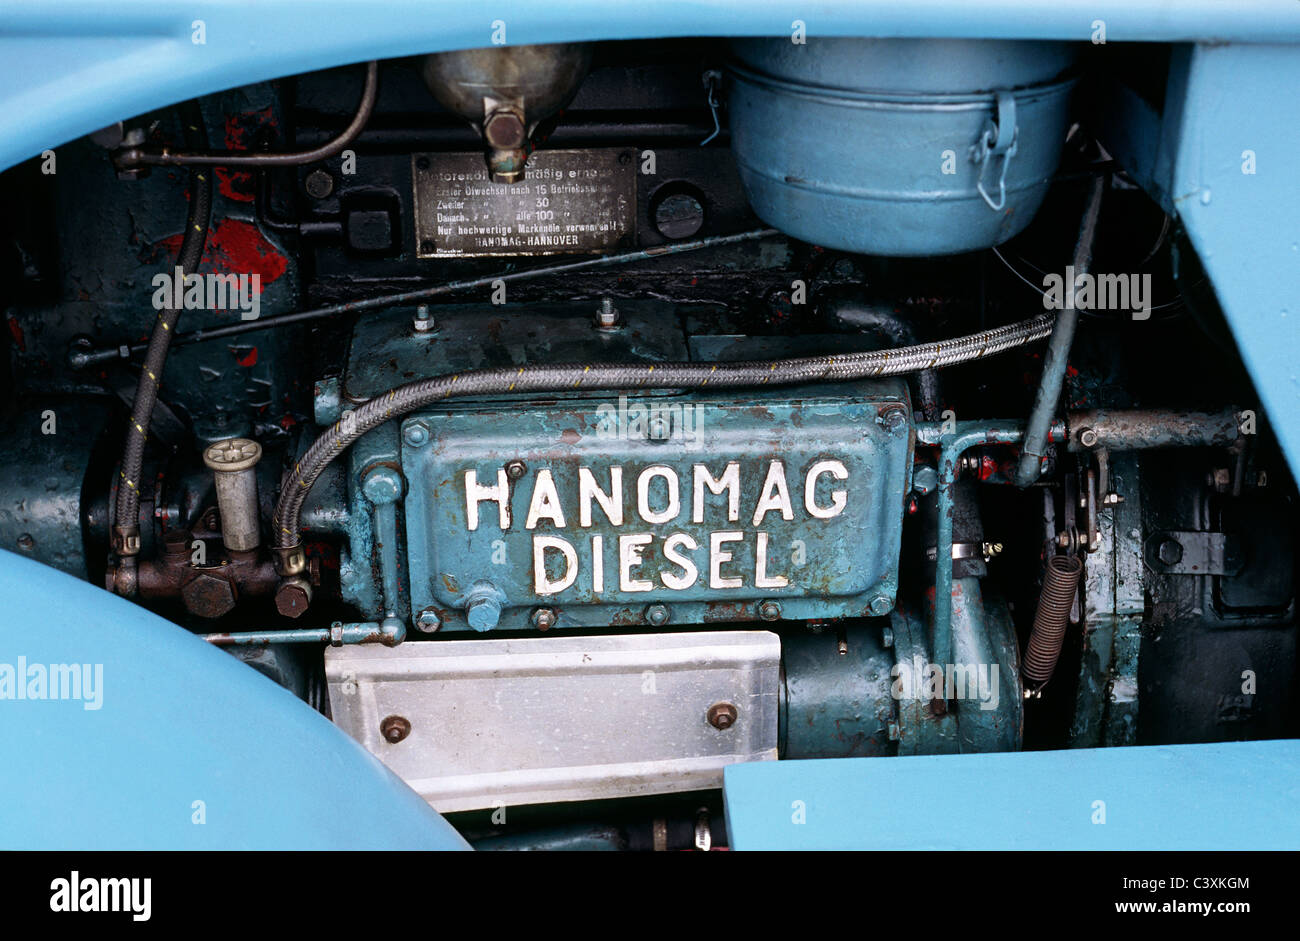 Engine of a vintage R45 Hanomag Diesel tractor in Bremerhaven in Germany. The R45 was built between 1950 and 1957. Stock Photo